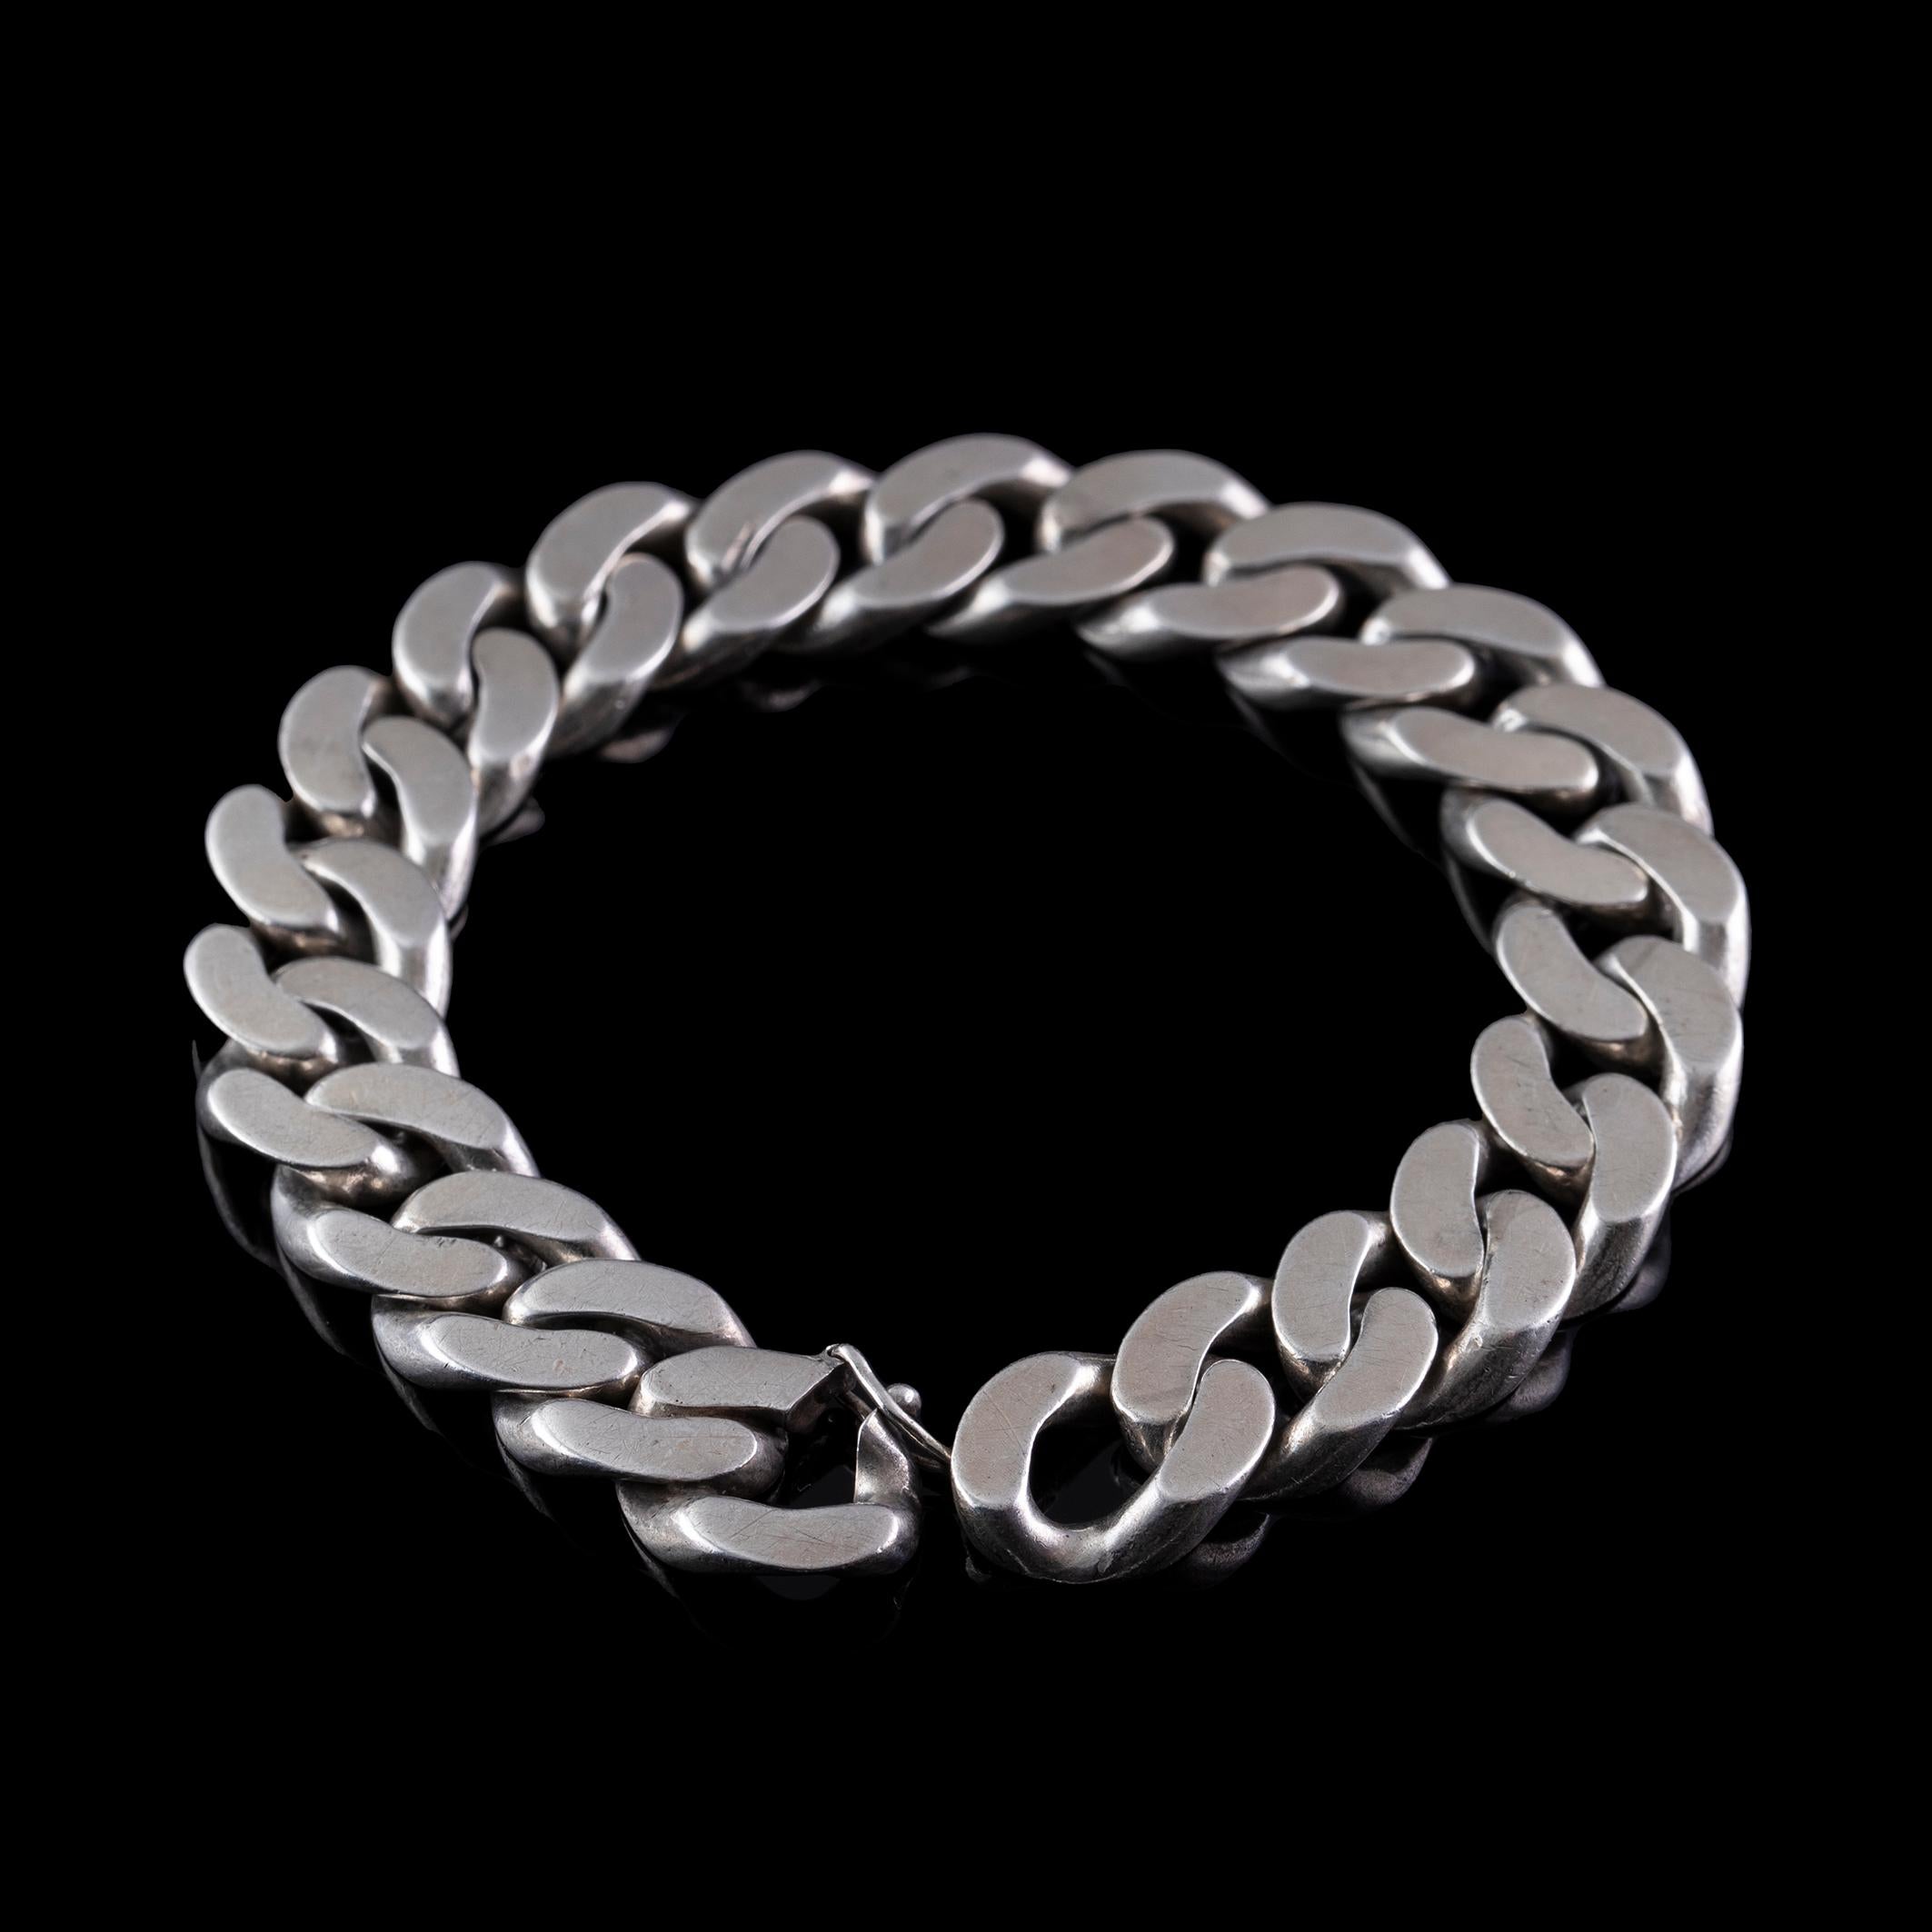 Add a touch of luxury to your accessory collection with the Gucci silver chain bracelet. This stunning piece of jewelry features a classic chain-link design, crafted from high-quality silver.

The timeless design of this Gucci bracelet makes it a